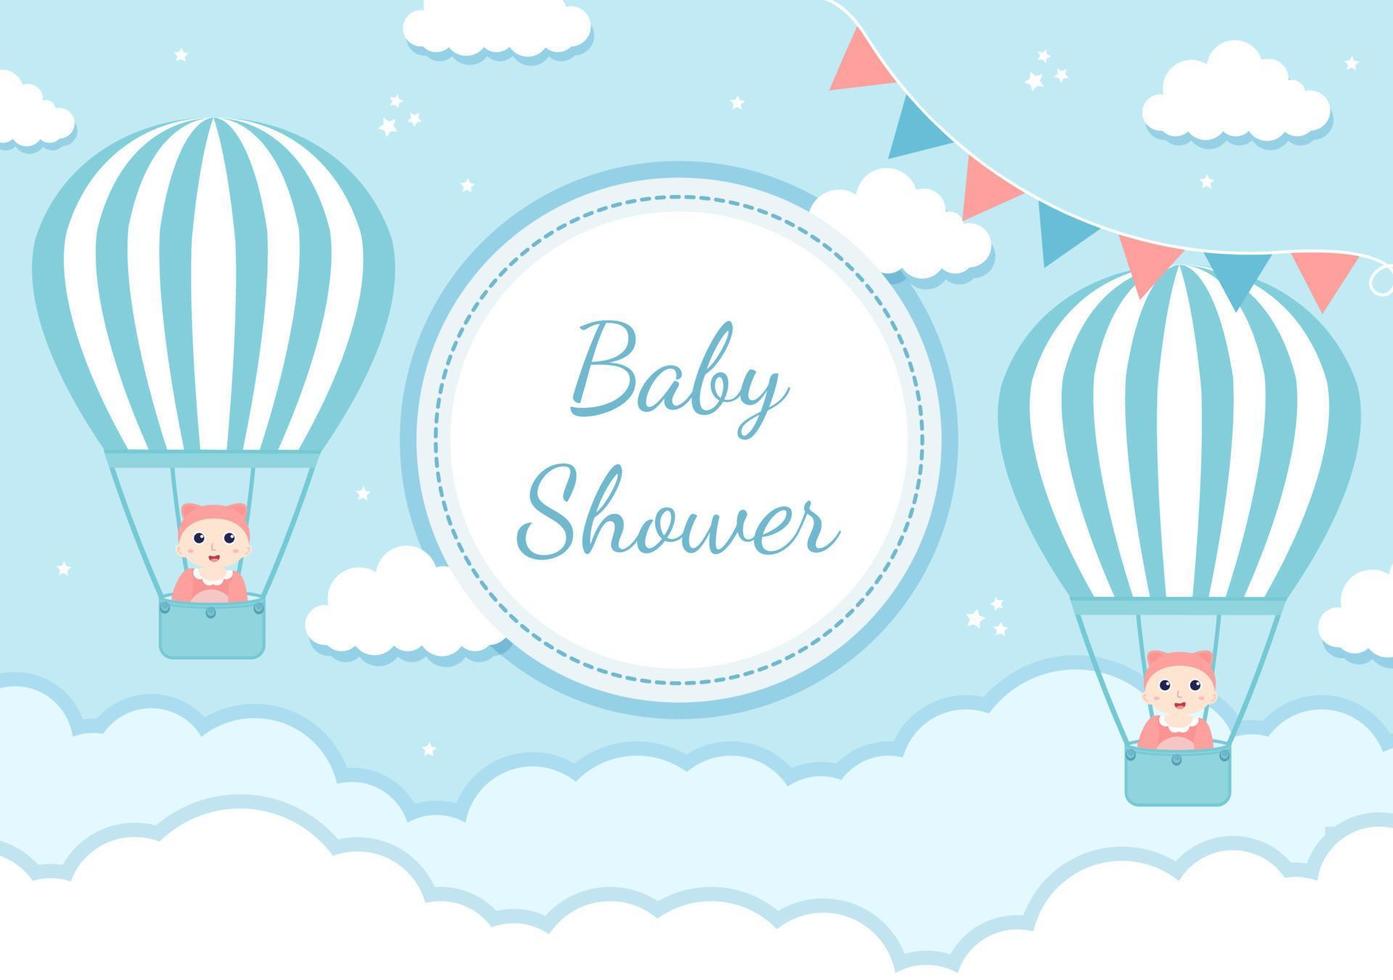 Baby Shower Little Boy or Girl with Cute Design Toys and Accessories Newborn Babies Background Illustration for Invitation and Greeting Cards vector